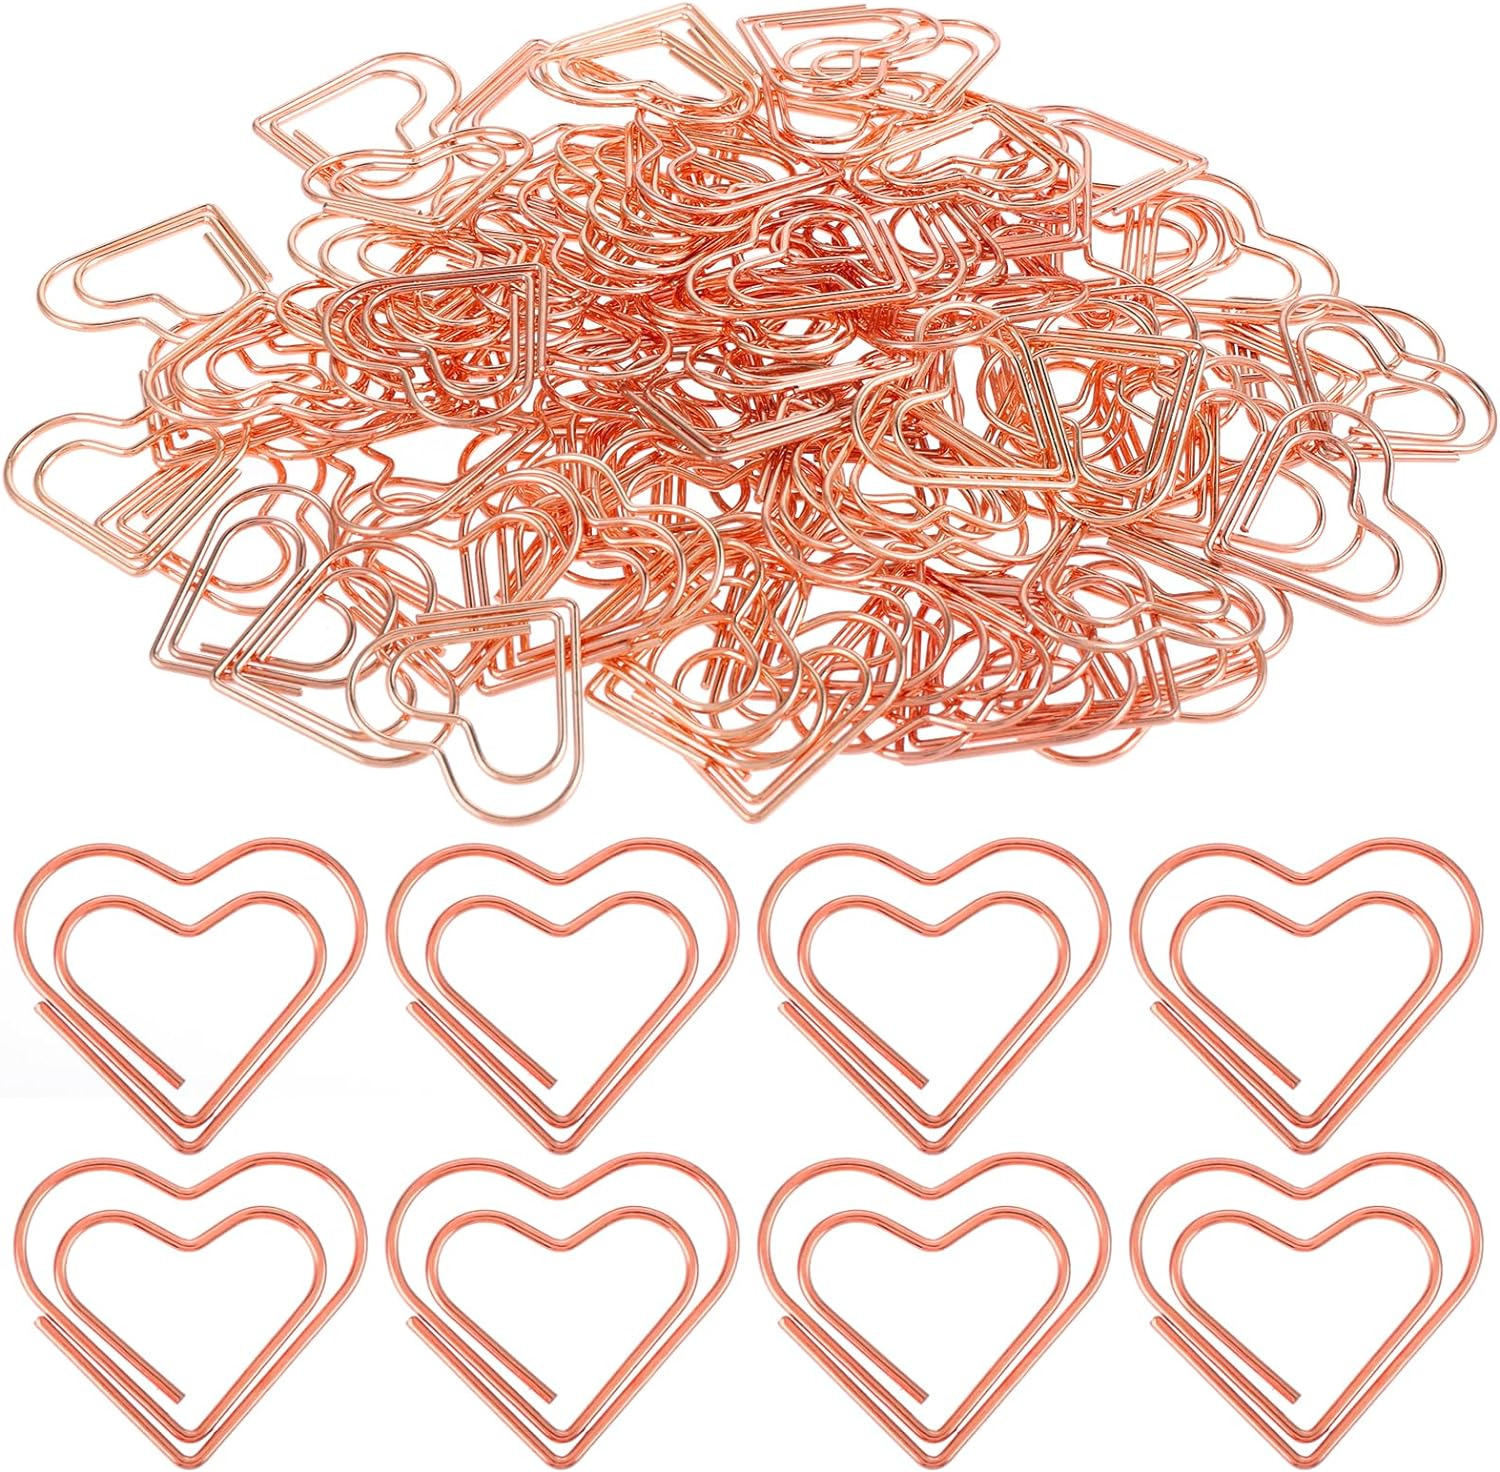 100Pcs Rose Gold Heart Paper Clips Cute Small Paper Clips for Funny Heart Clips 